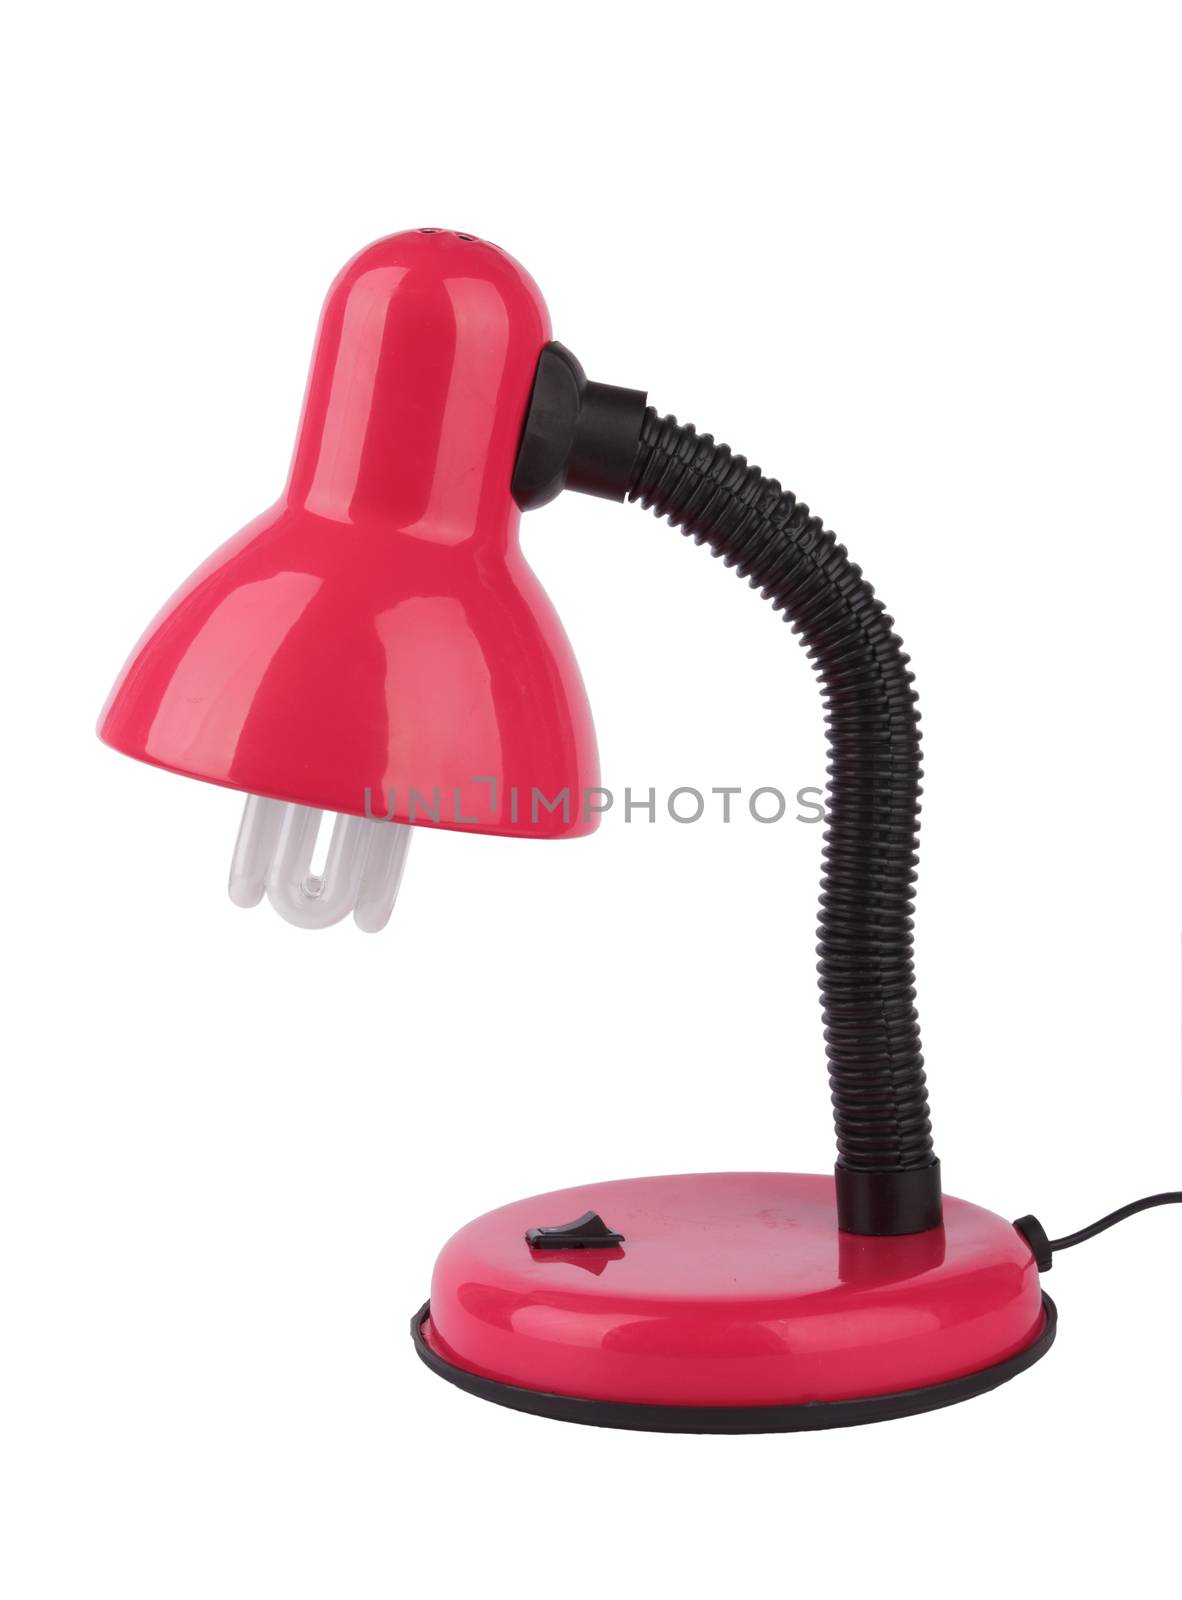 Red table lamp isolated on a white background